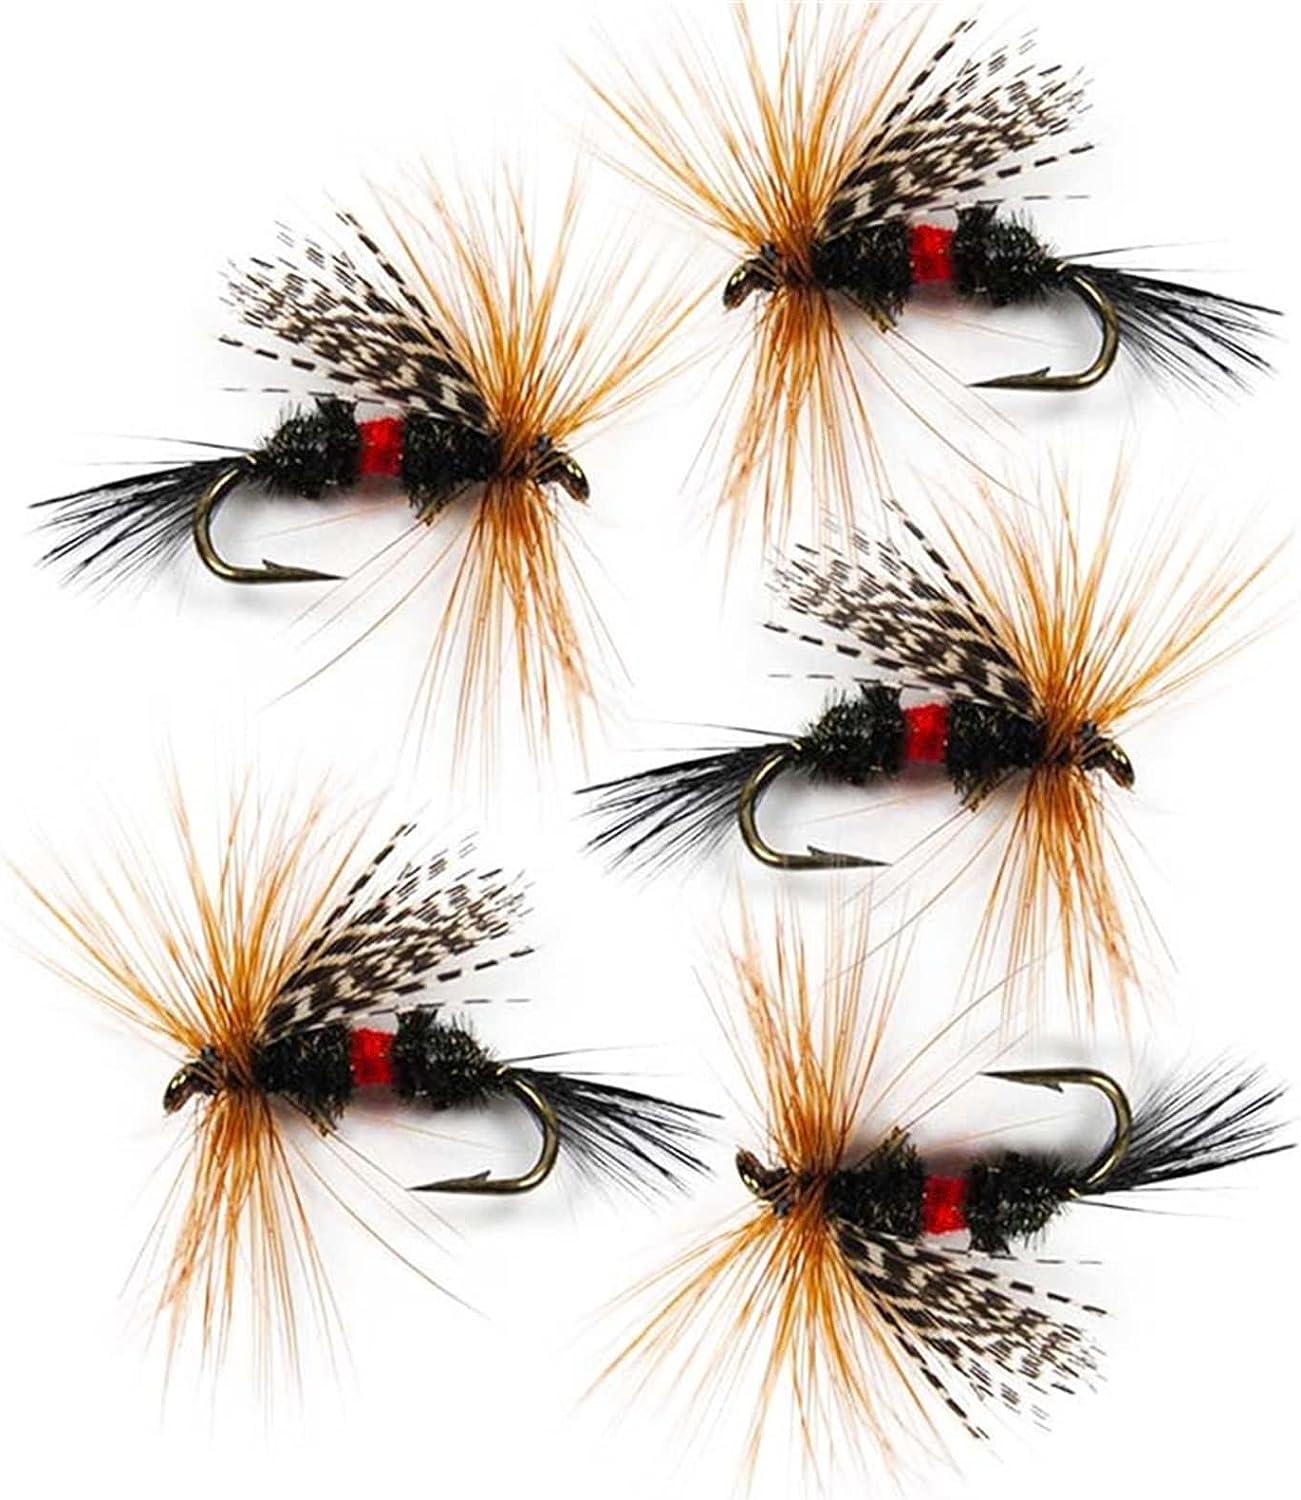 Qievcrme 24/127-Pieces Fly Fishing Files Kit #8-#16 Handmade Dry Wet Nymphs  Streamers